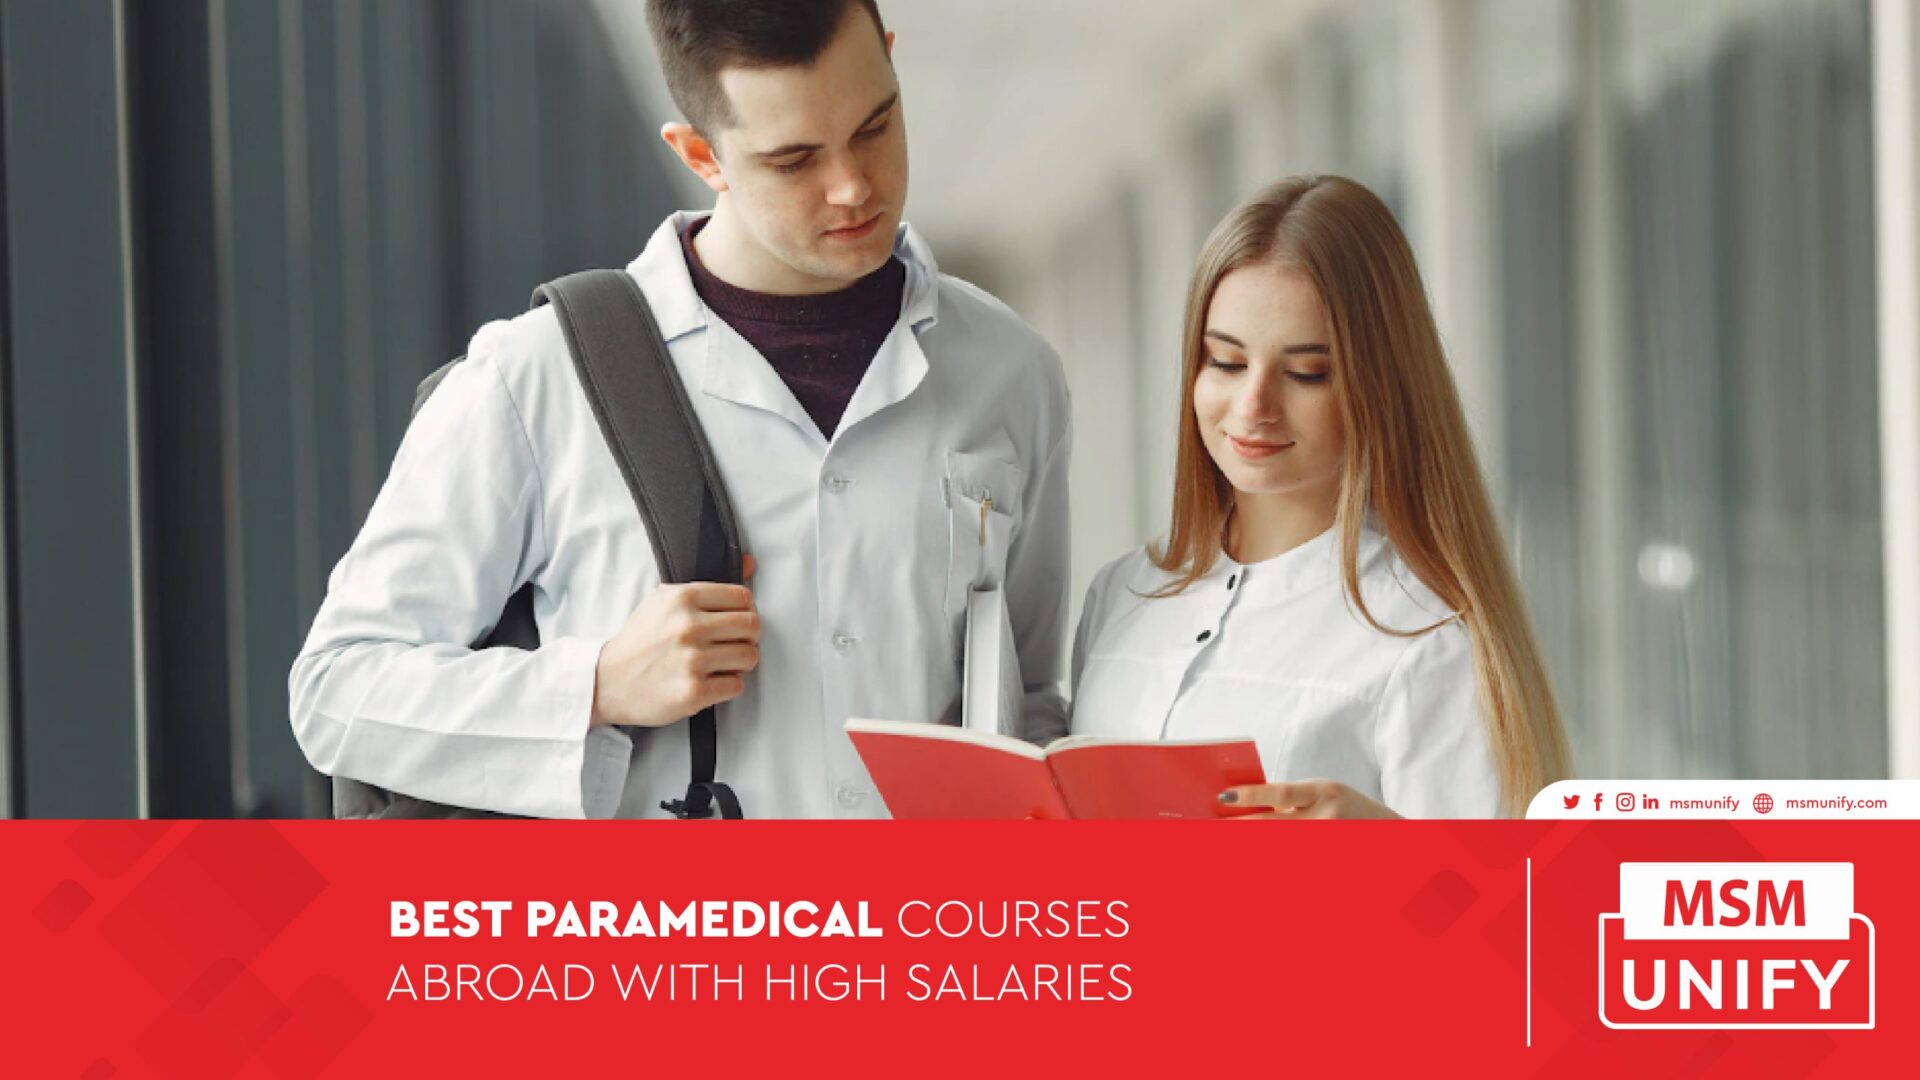 012623 MSM Unify Best Paramedical Courses Abroad with High Salaries 01 1 scaled 1